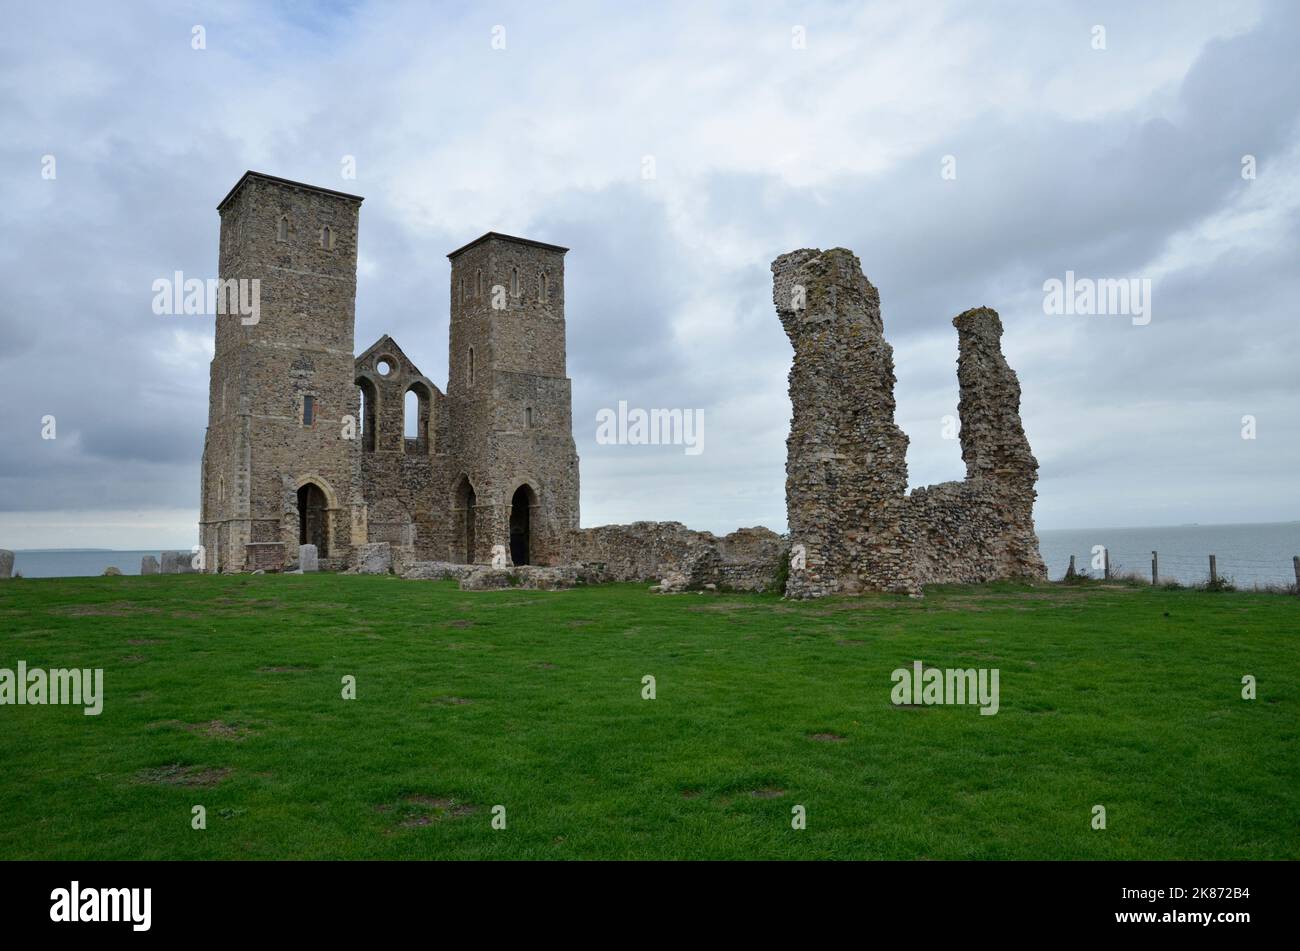 The ruined St. Mary's Church at Reculver on the Kent coast. It was partly demolished in 1809. Stock Photo